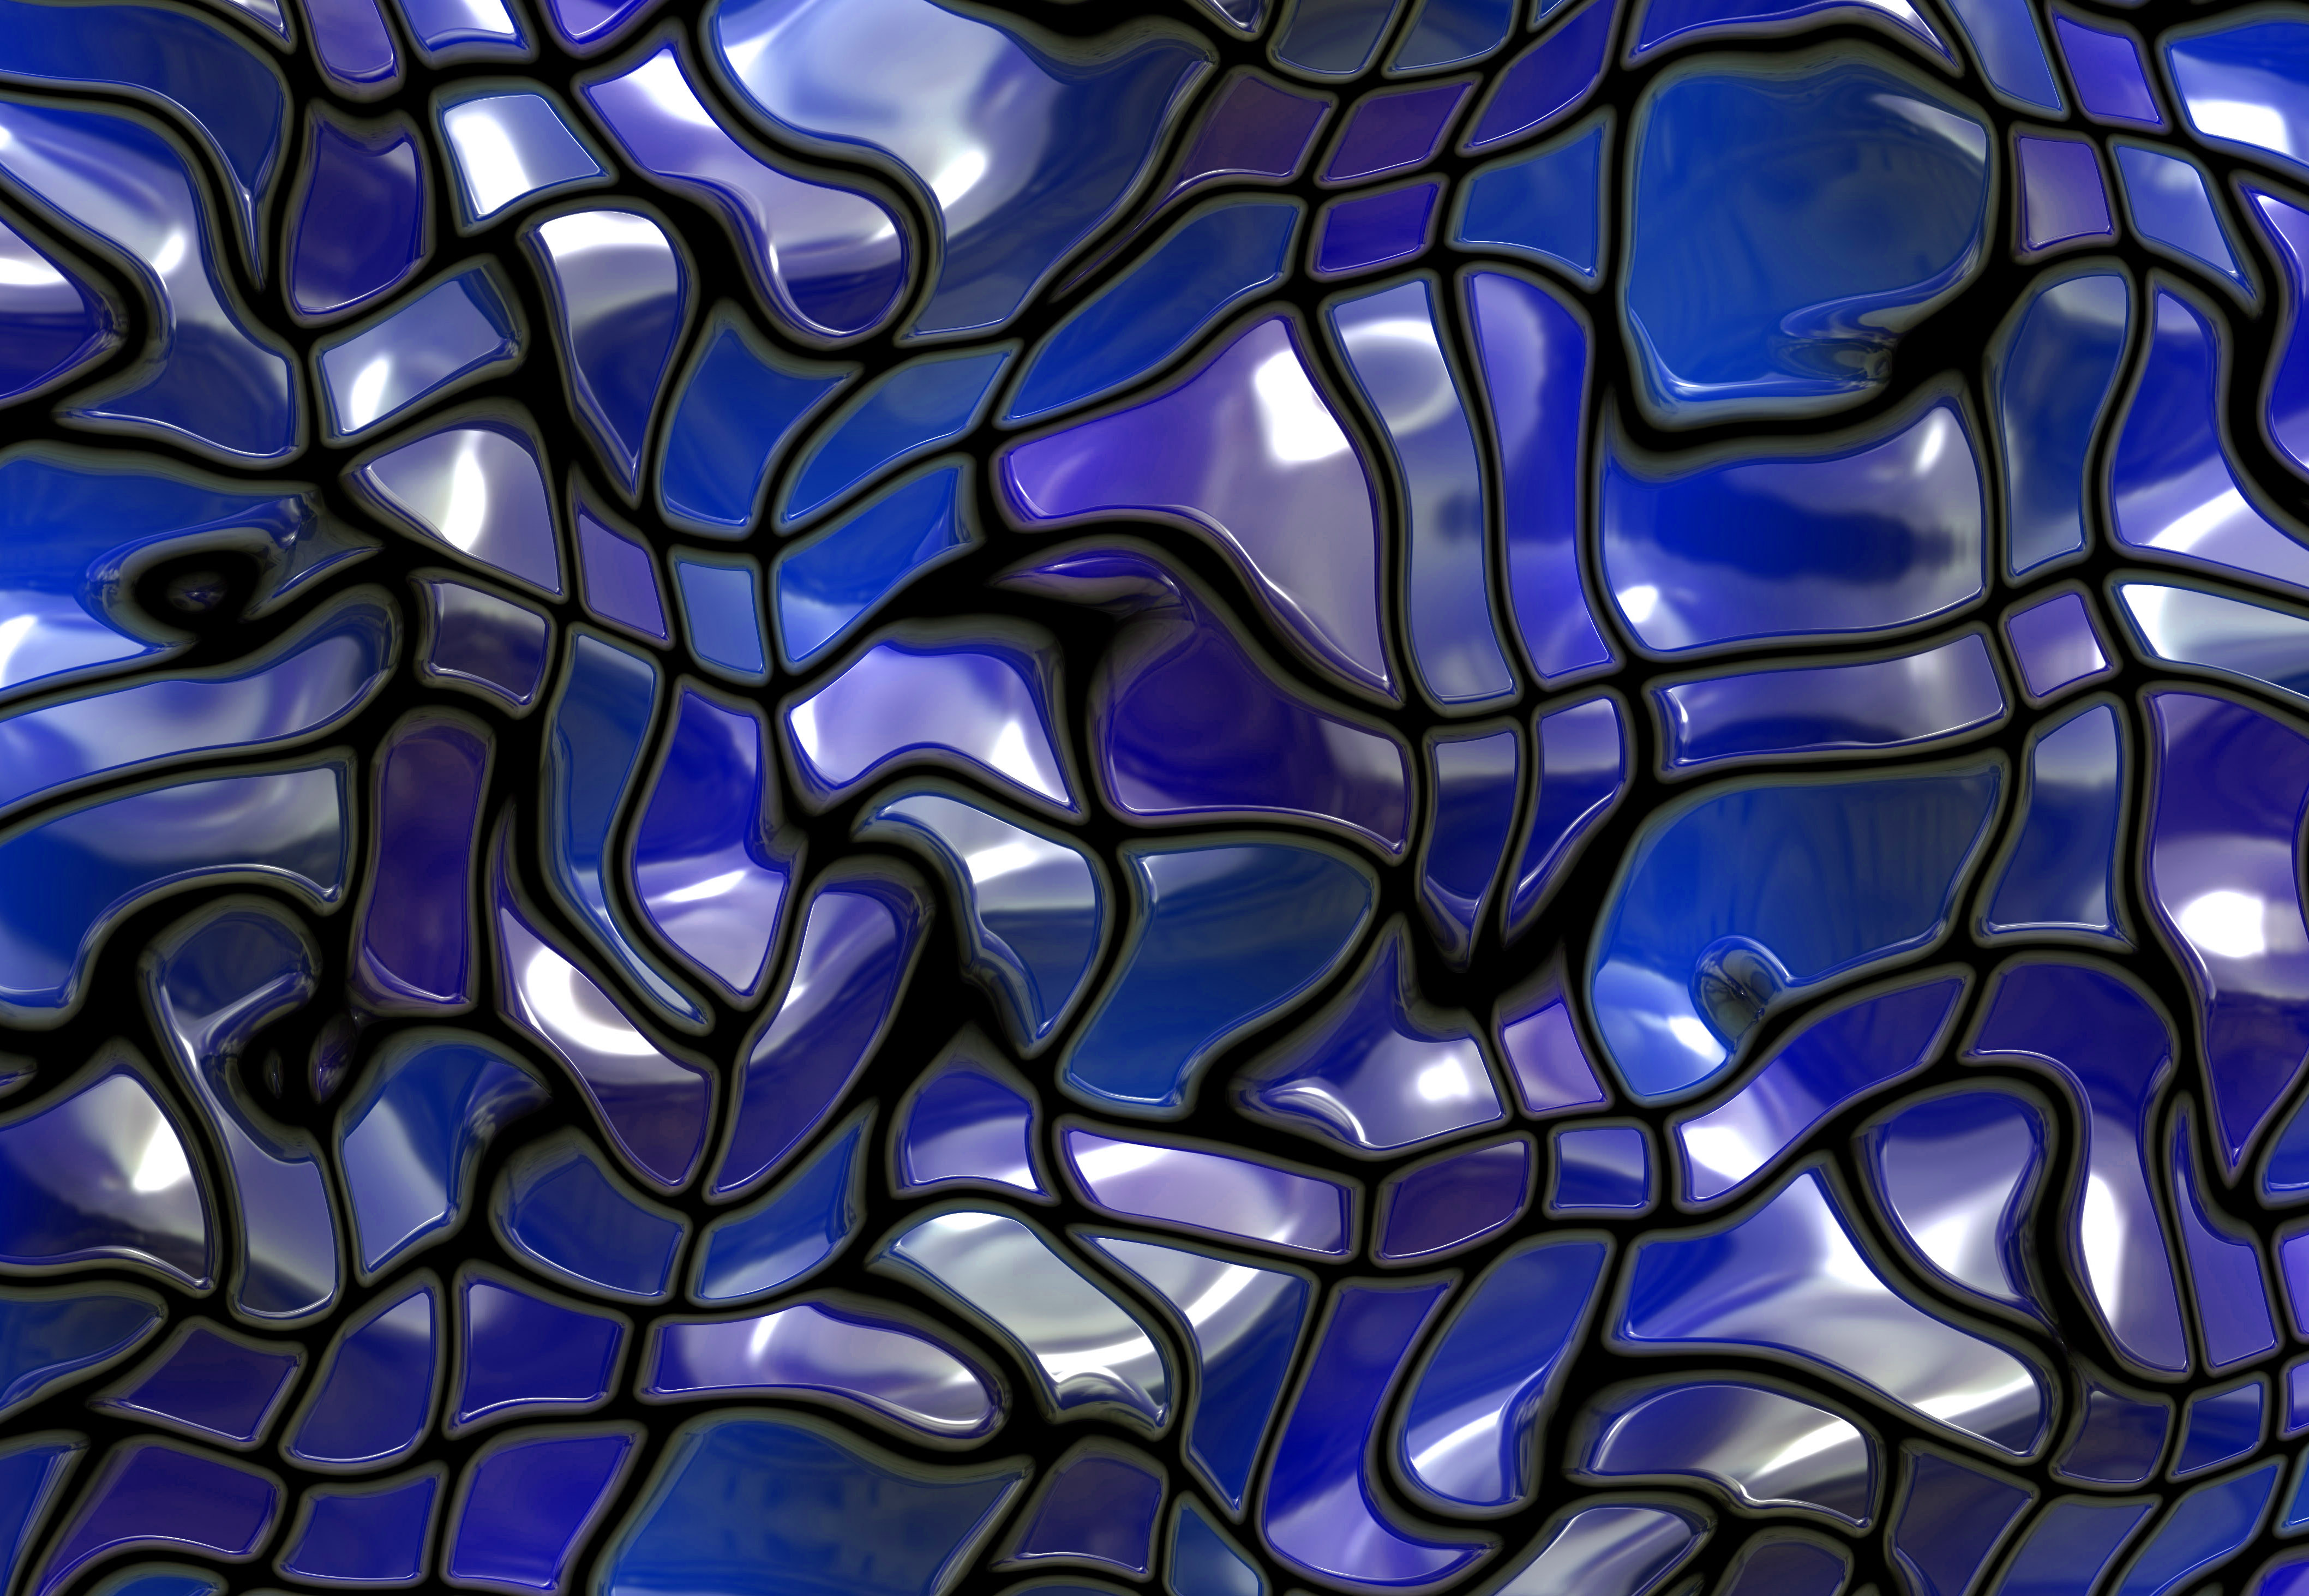 Abstract texture of blue glass tiles in an ocean like jigsaw | www